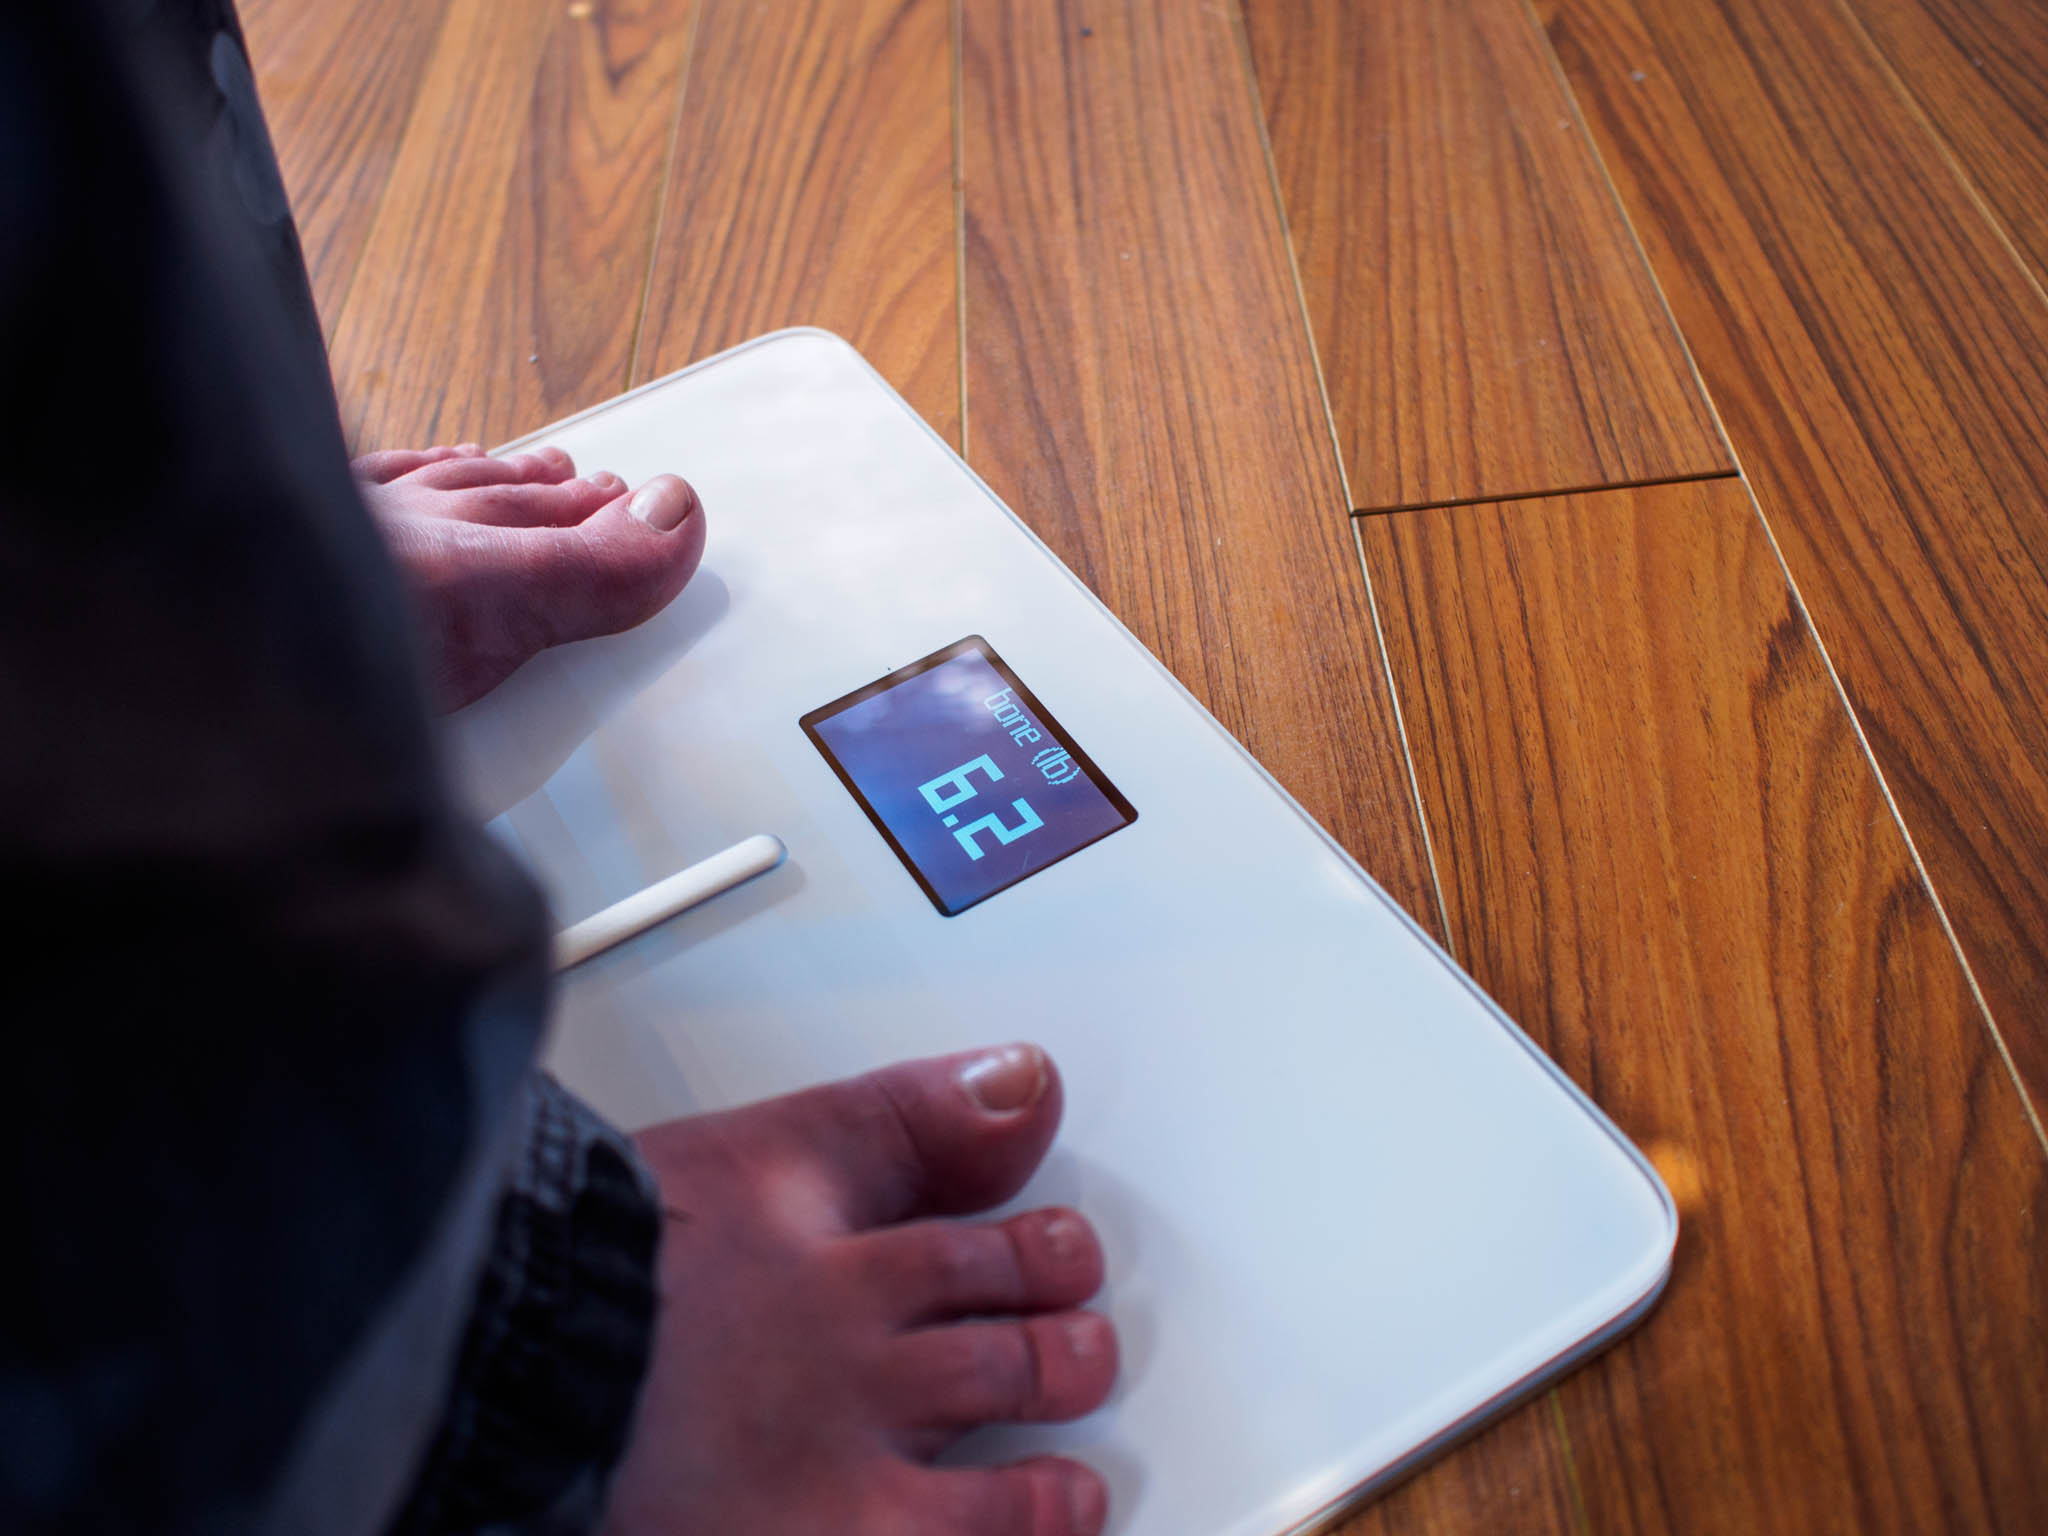 The WIthings Body Cardio smart scale